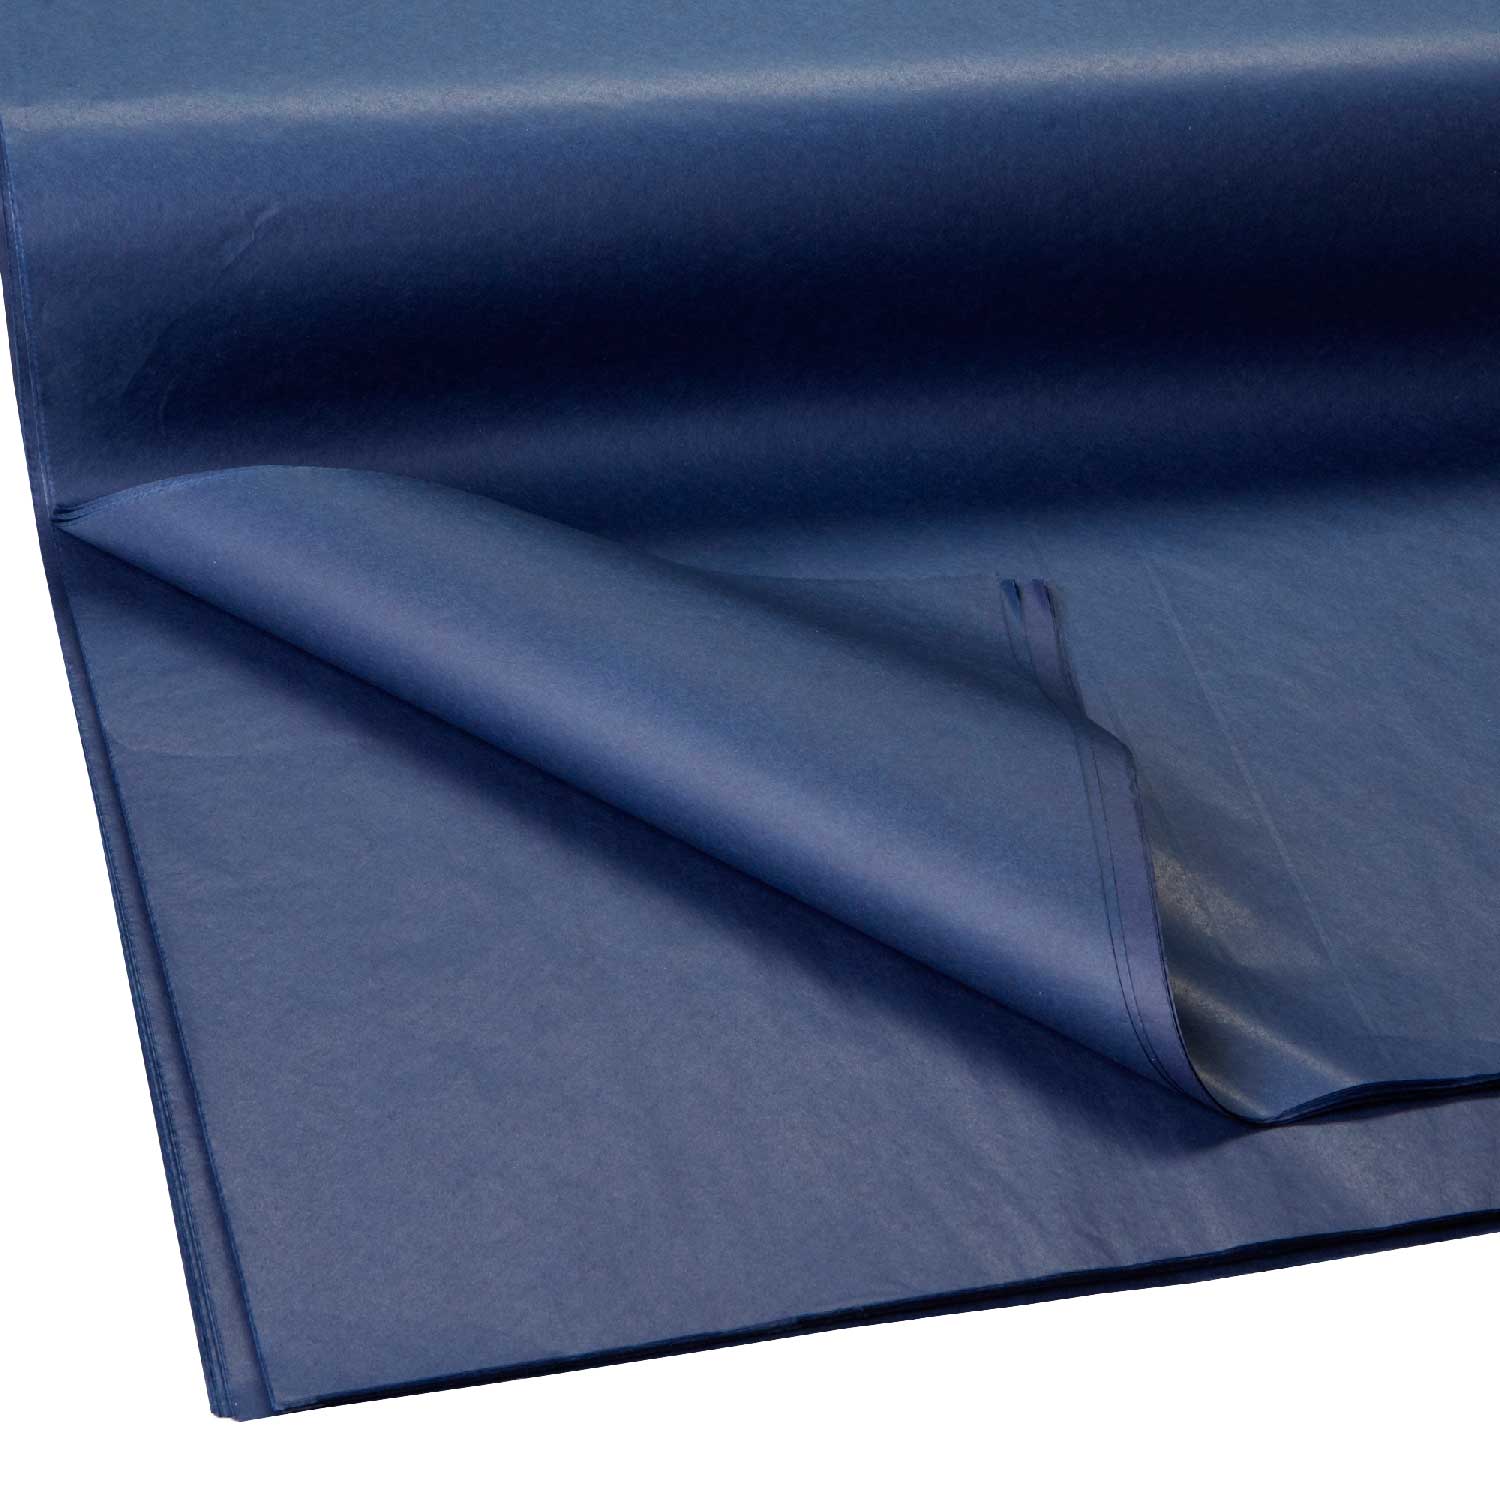 BFT26a Solid Color Navy Blue Tissue Paper Swatch